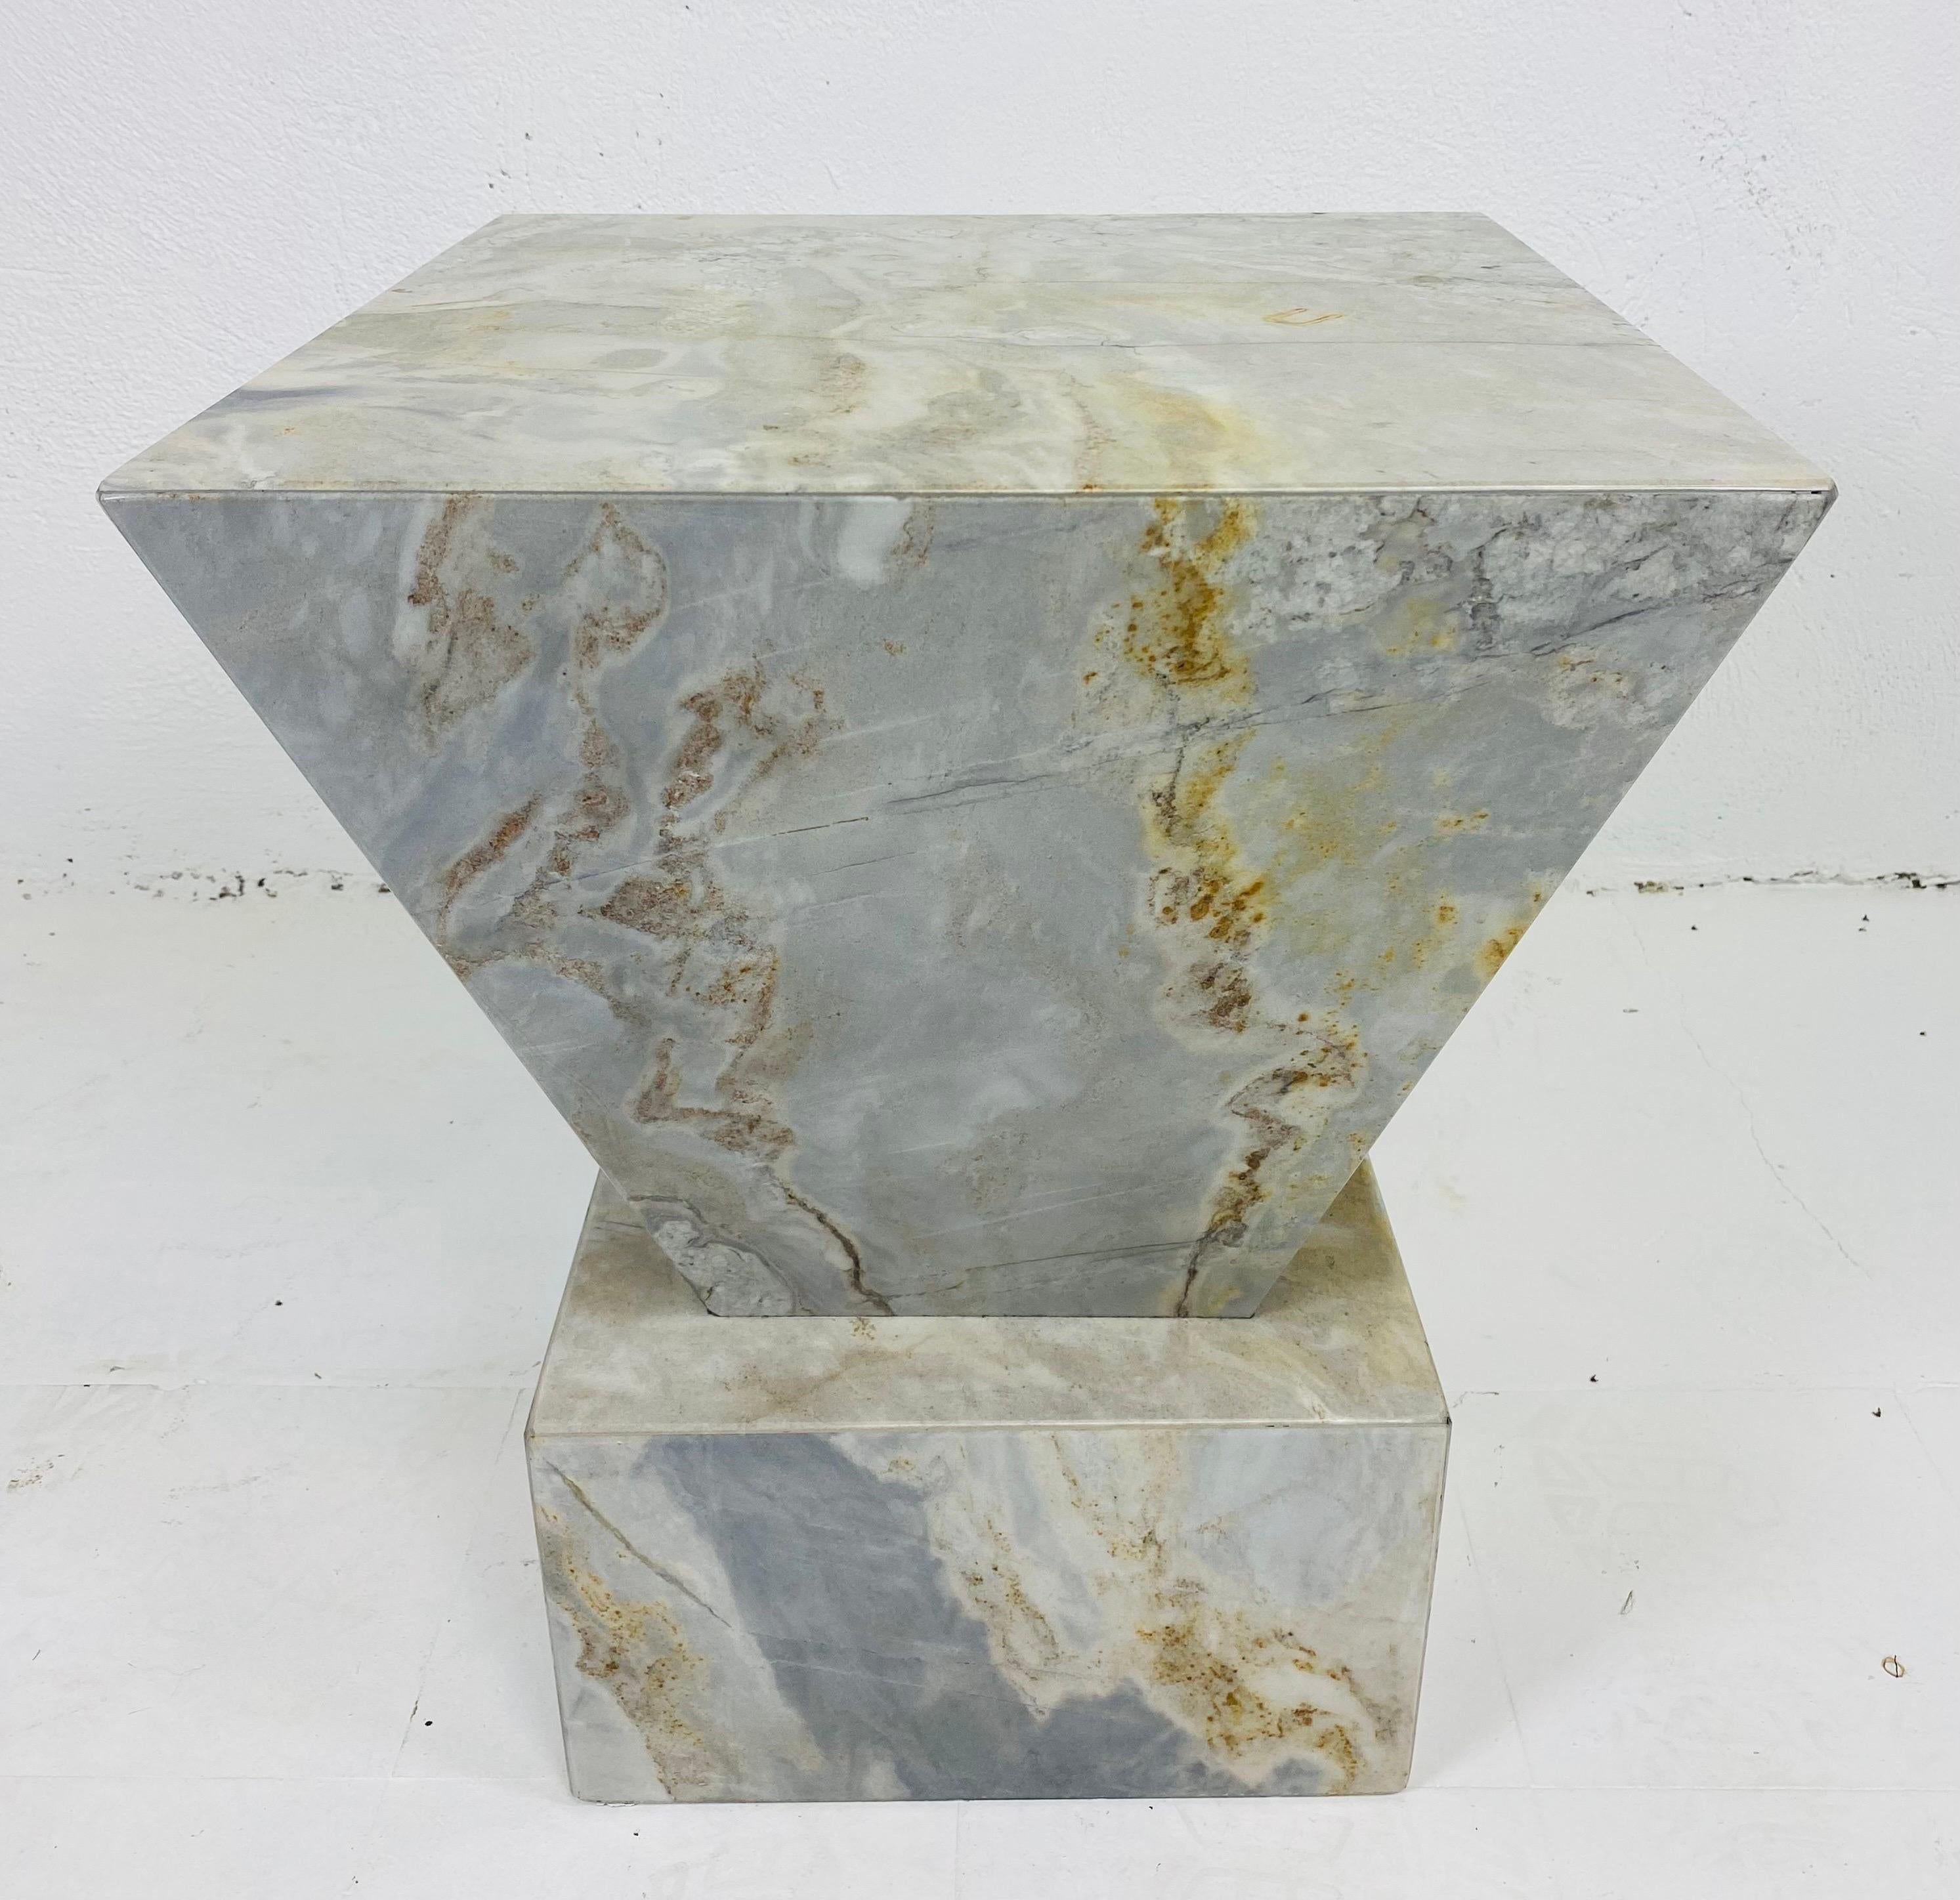 This is a midcentury vintage modern marble side table or pedestal. This Italian marble side table is made of a light gray marble with black, cream and tan vaining. This piece would work beautifully as a side table or a pedestal to display a